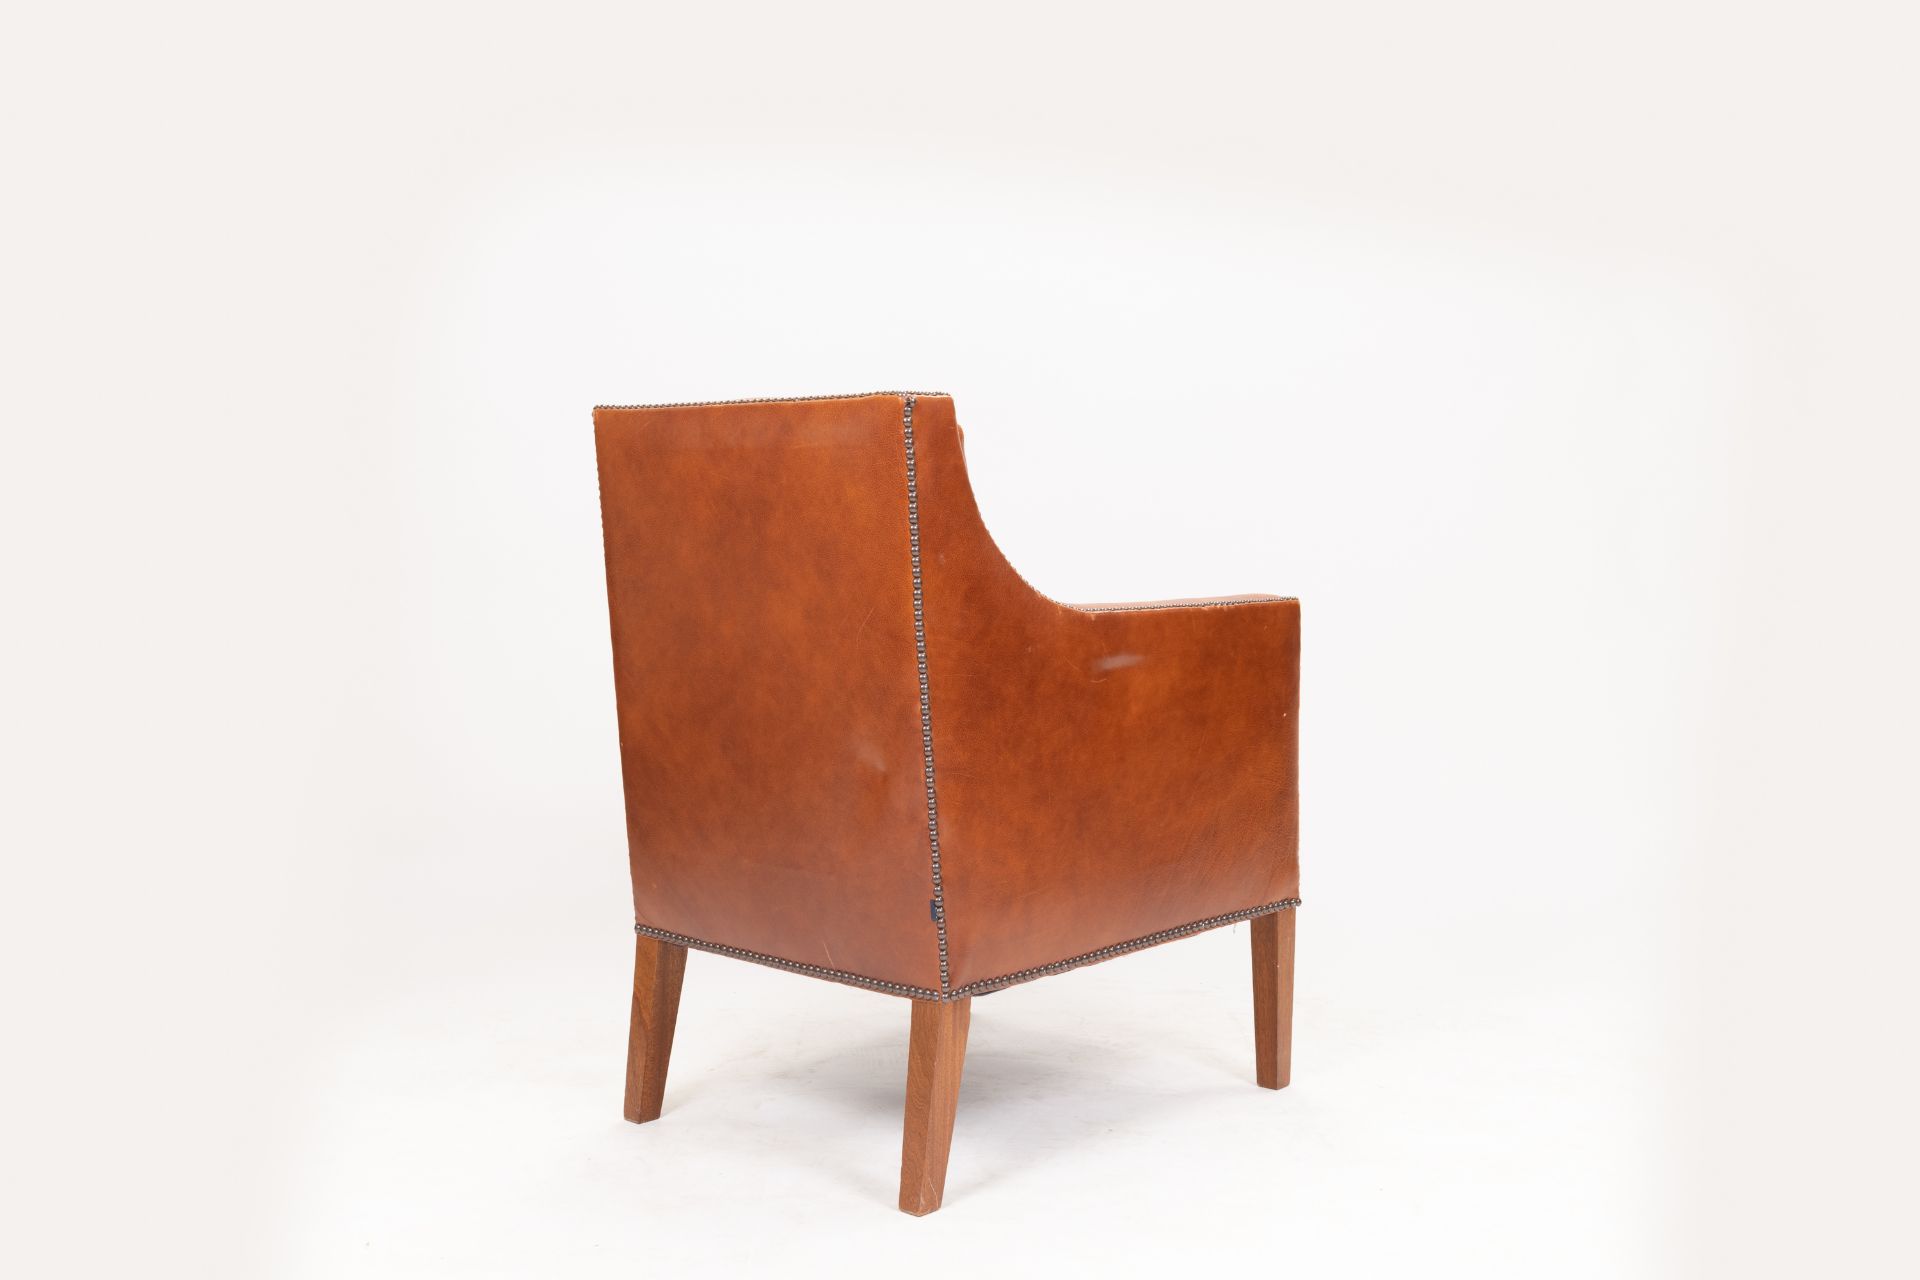 David Linley Lord Nelson Armchair - Image 5 of 9